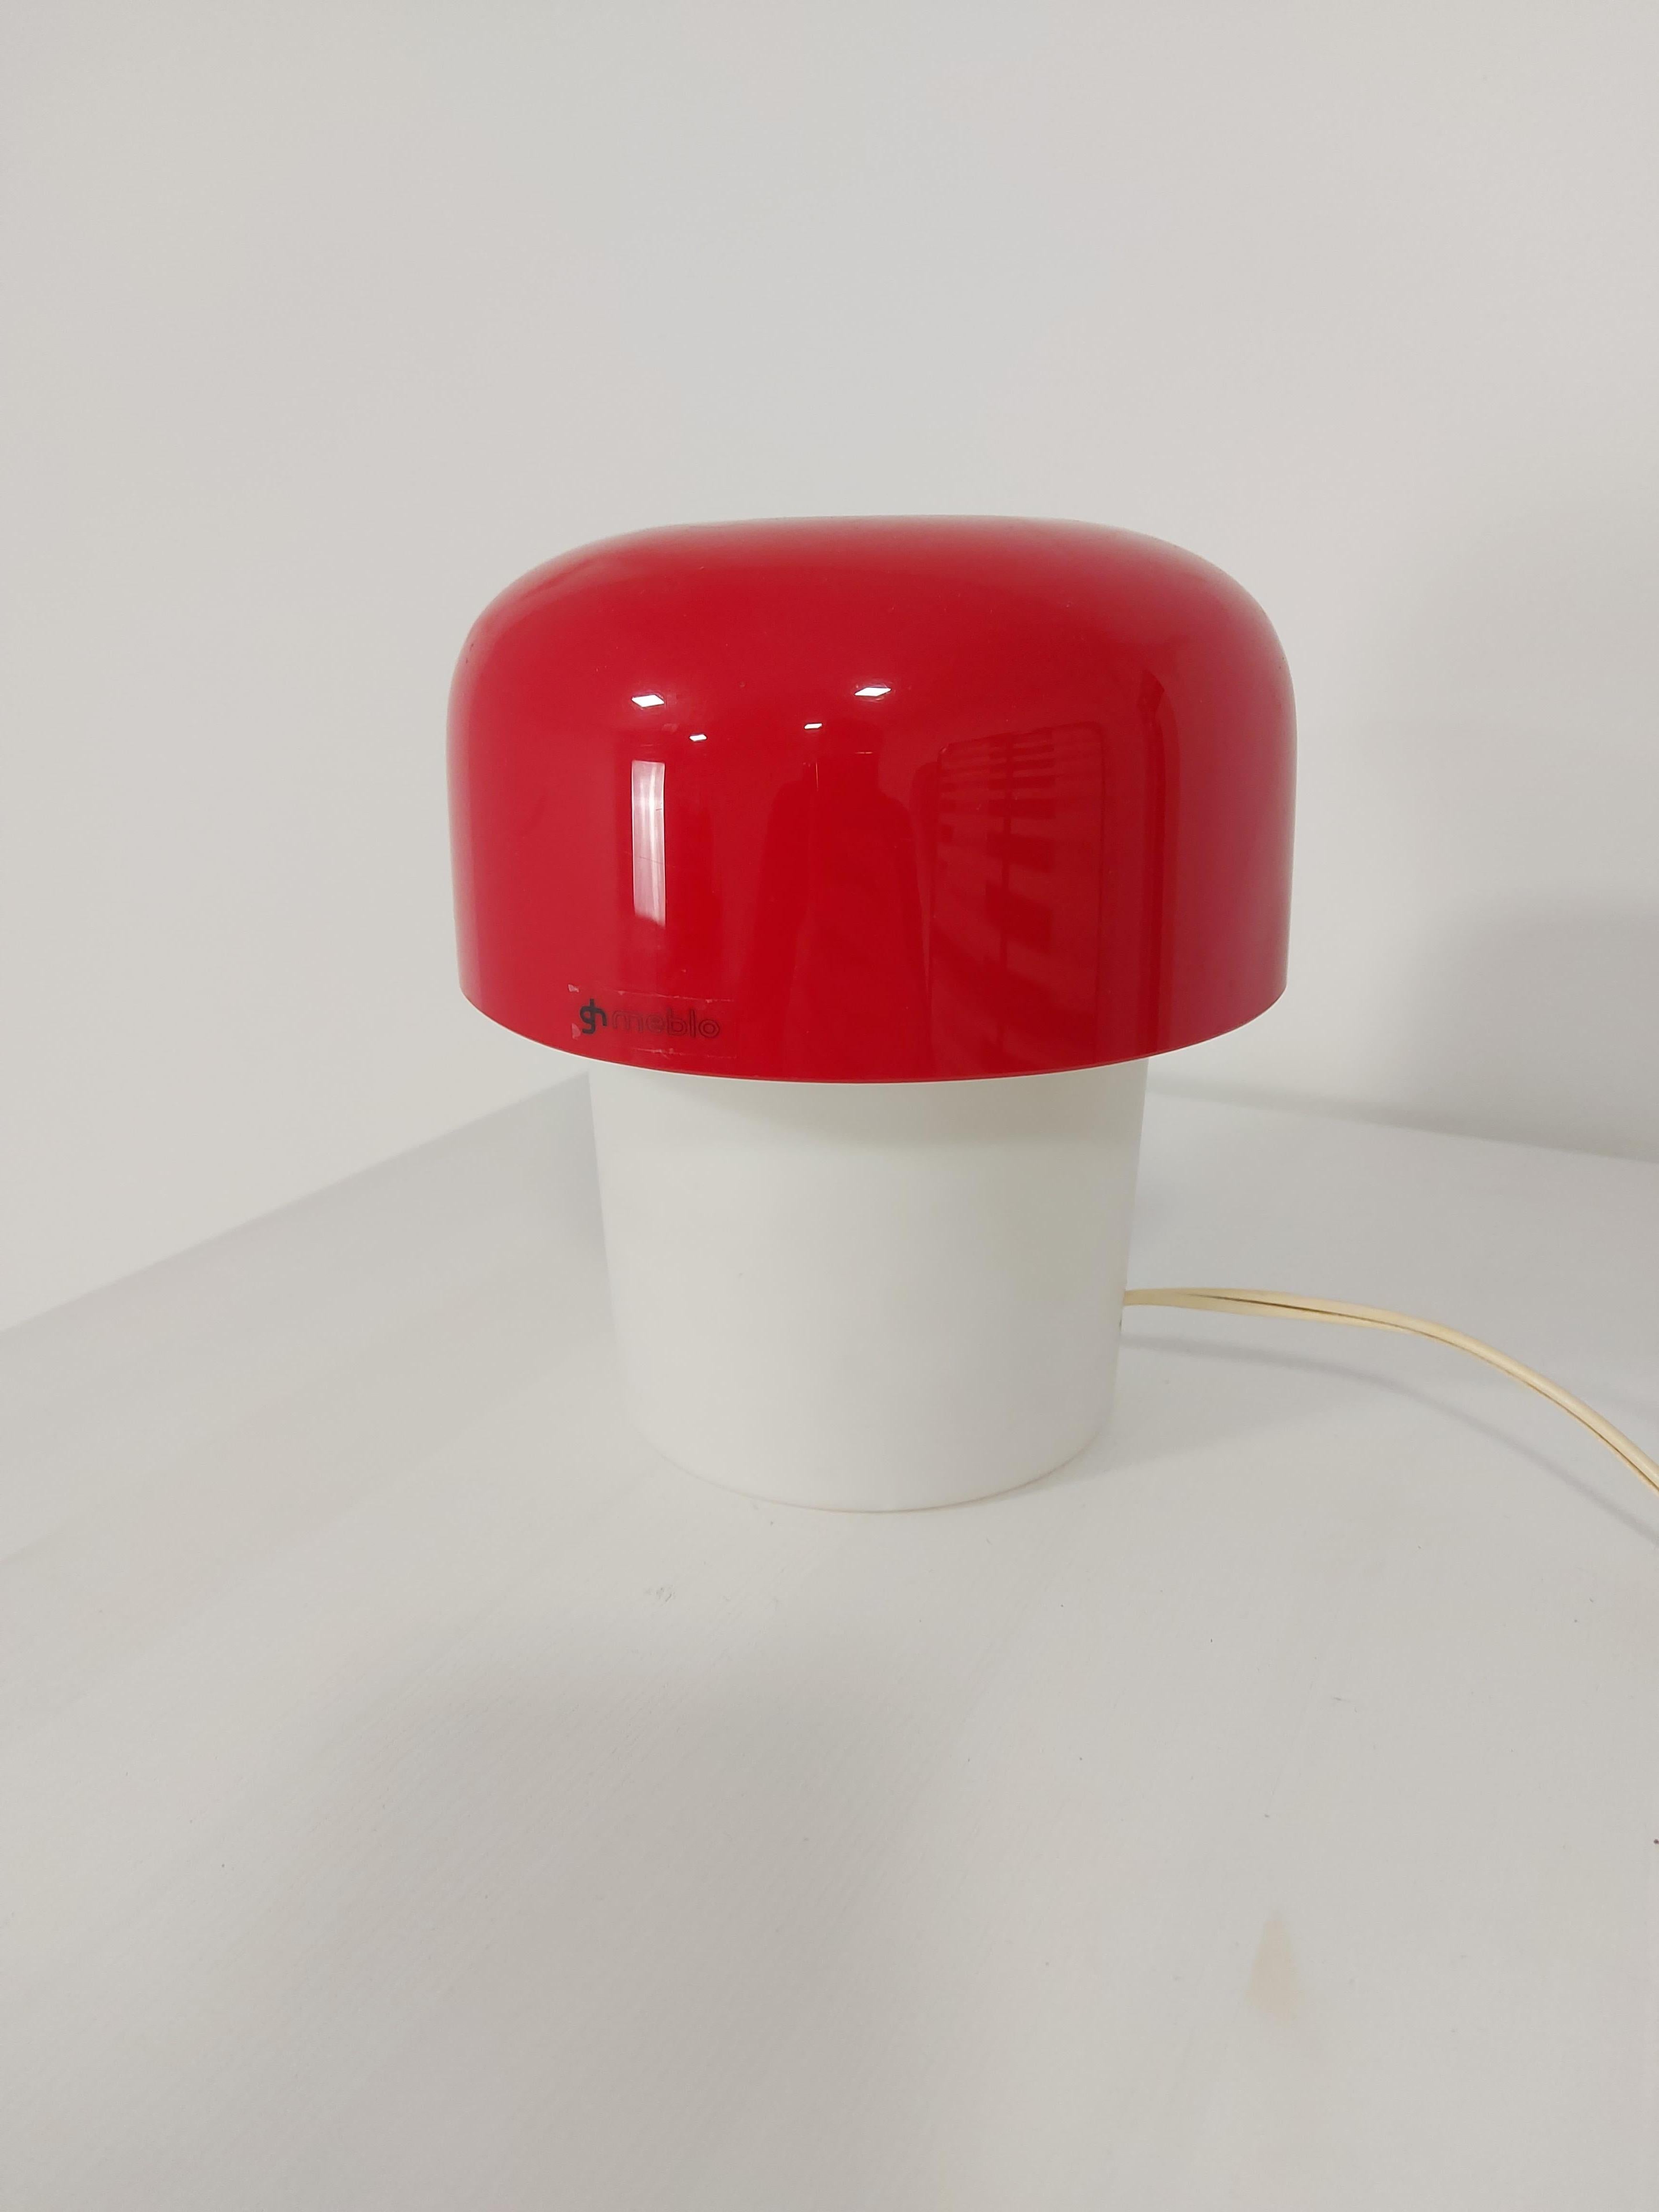 Elegant Harvey Guzzini lamp by Meblo in the 70’s. This is a small and rare lamp in good condition, it works perfectly. The lamp creates warm atmosphere. Nice little lamp from the 70’s. H-17 cm, W-16 (11) cm.